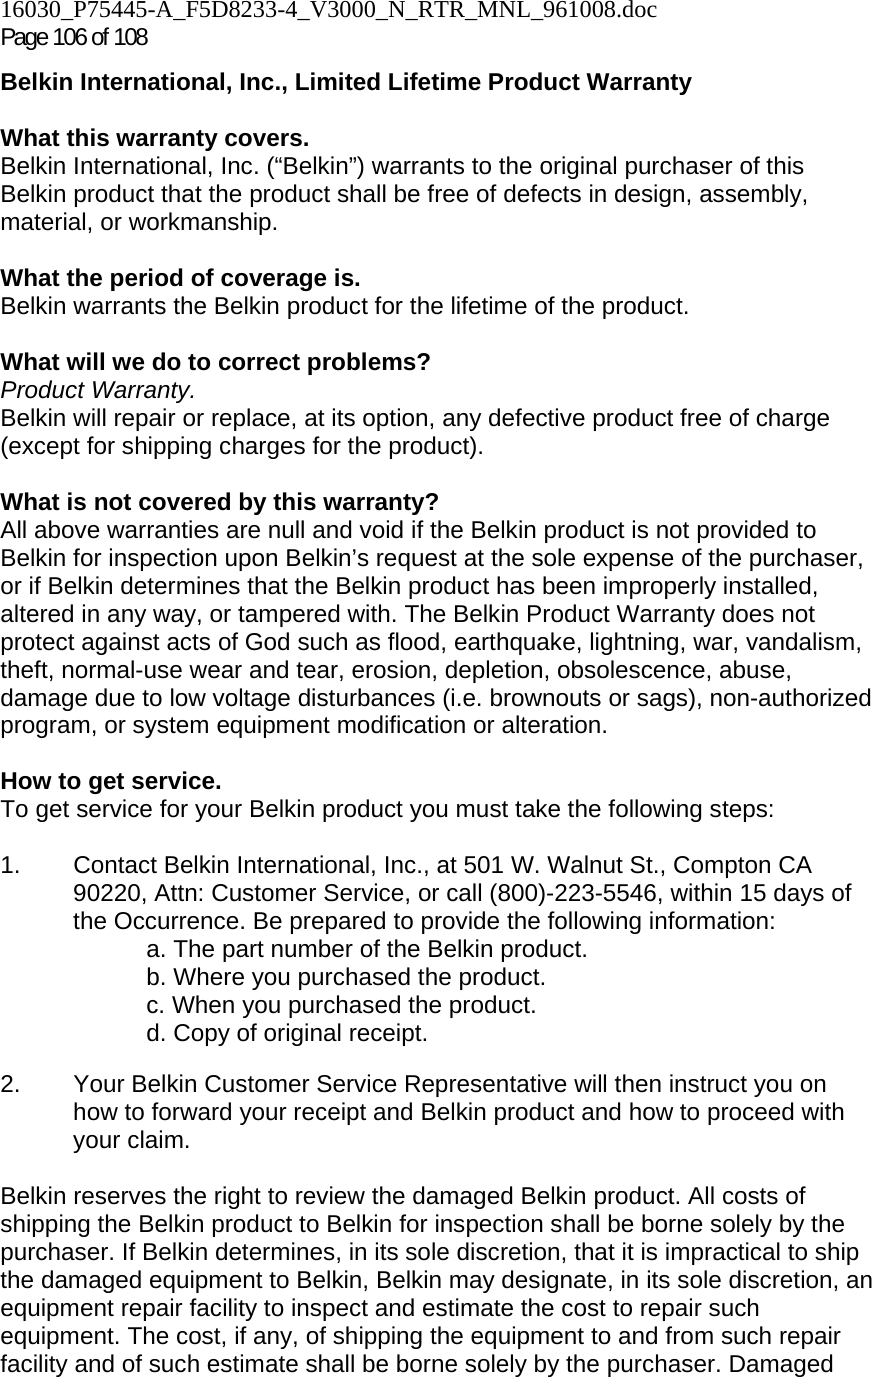 16030_P75445-A_F5D8233-4_V3000_N_RTR_MNL_961008.doc Page 106 of 108 Belkin International, Inc., Limited Lifetime Product Warranty  What this warranty covers. Belkin International, Inc. (“Belkin”) warrants to the original purchaser of this Belkin product that the product shall be free of defects in design, assembly, material, or workmanship.   What the period of coverage is. Belkin warrants the Belkin product for the lifetime of the product.  What will we do to correct problems?  Product Warranty. Belkin will repair or replace, at its option, any defective product free of charge (except for shipping charges for the product).    What is not covered by this warranty? All above warranties are null and void if the Belkin product is not provided to Belkin for inspection upon Belkin’s request at the sole expense of the purchaser, or if Belkin determines that the Belkin product has been improperly installed, altered in any way, or tampered with. The Belkin Product Warranty does not protect against acts of God such as flood, earthquake, lightning, war, vandalism, theft, normal-use wear and tear, erosion, depletion, obsolescence, abuse, damage due to low voltage disturbances (i.e. brownouts or sags), non-authorized program, or system equipment modification or alteration.  How to get service.    To get service for your Belkin product you must take the following steps:  1.  Contact Belkin International, Inc., at 501 W. Walnut St., Compton CA 90220, Attn: Customer Service, or call (800)-223-5546, within 15 days of the Occurrence. Be prepared to provide the following information: a. The part number of the Belkin product. b. Where you purchased the product. c. When you purchased the product. d. Copy of original receipt.  2.  Your Belkin Customer Service Representative will then instruct you on how to forward your receipt and Belkin product and how to proceed with your claim.  Belkin reserves the right to review the damaged Belkin product. All costs of shipping the Belkin product to Belkin for inspection shall be borne solely by the purchaser. If Belkin determines, in its sole discretion, that it is impractical to ship the damaged equipment to Belkin, Belkin may designate, in its sole discretion, an equipment repair facility to inspect and estimate the cost to repair such equipment. The cost, if any, of shipping the equipment to and from such repair facility and of such estimate shall be borne solely by the purchaser. Damaged 